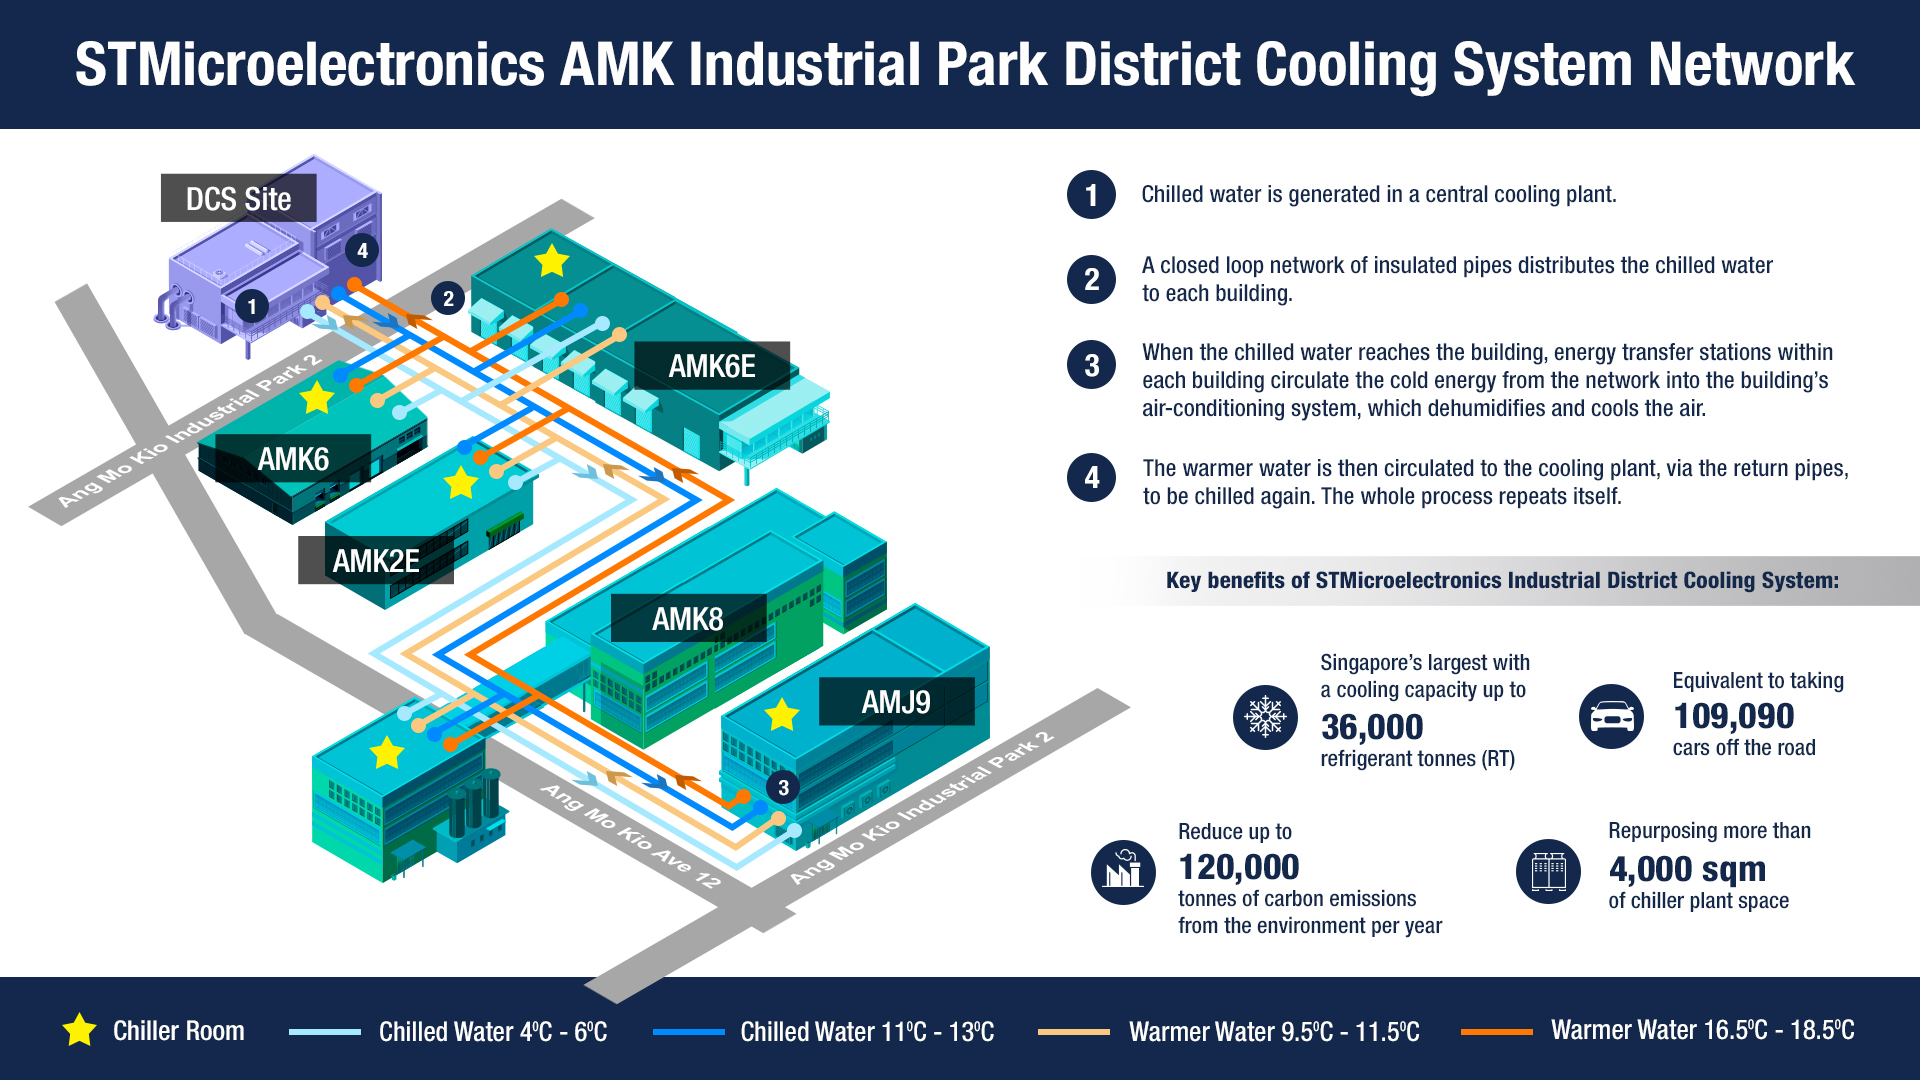 The upcoming District Cooling System at ST's AMK TechnoPark